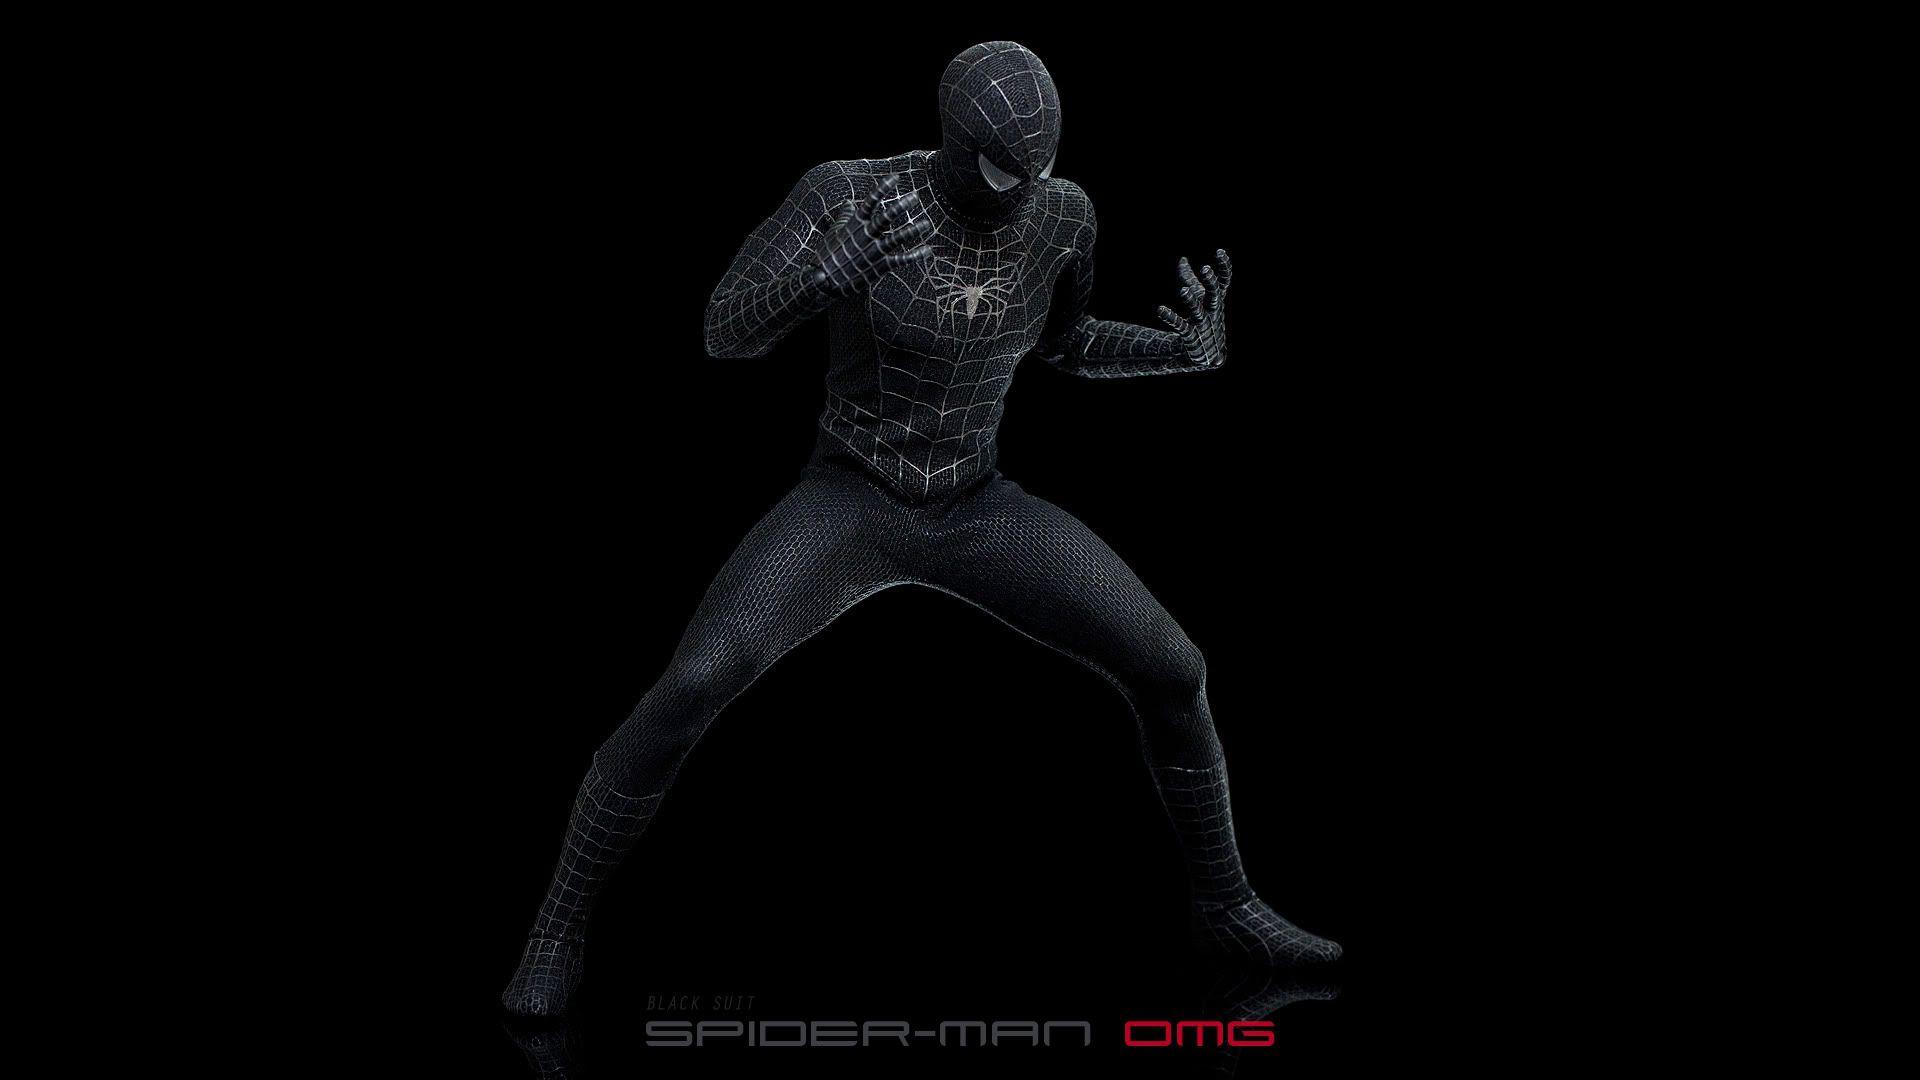 OMG's Photo Review Hot Toys Black Suit Spider Man